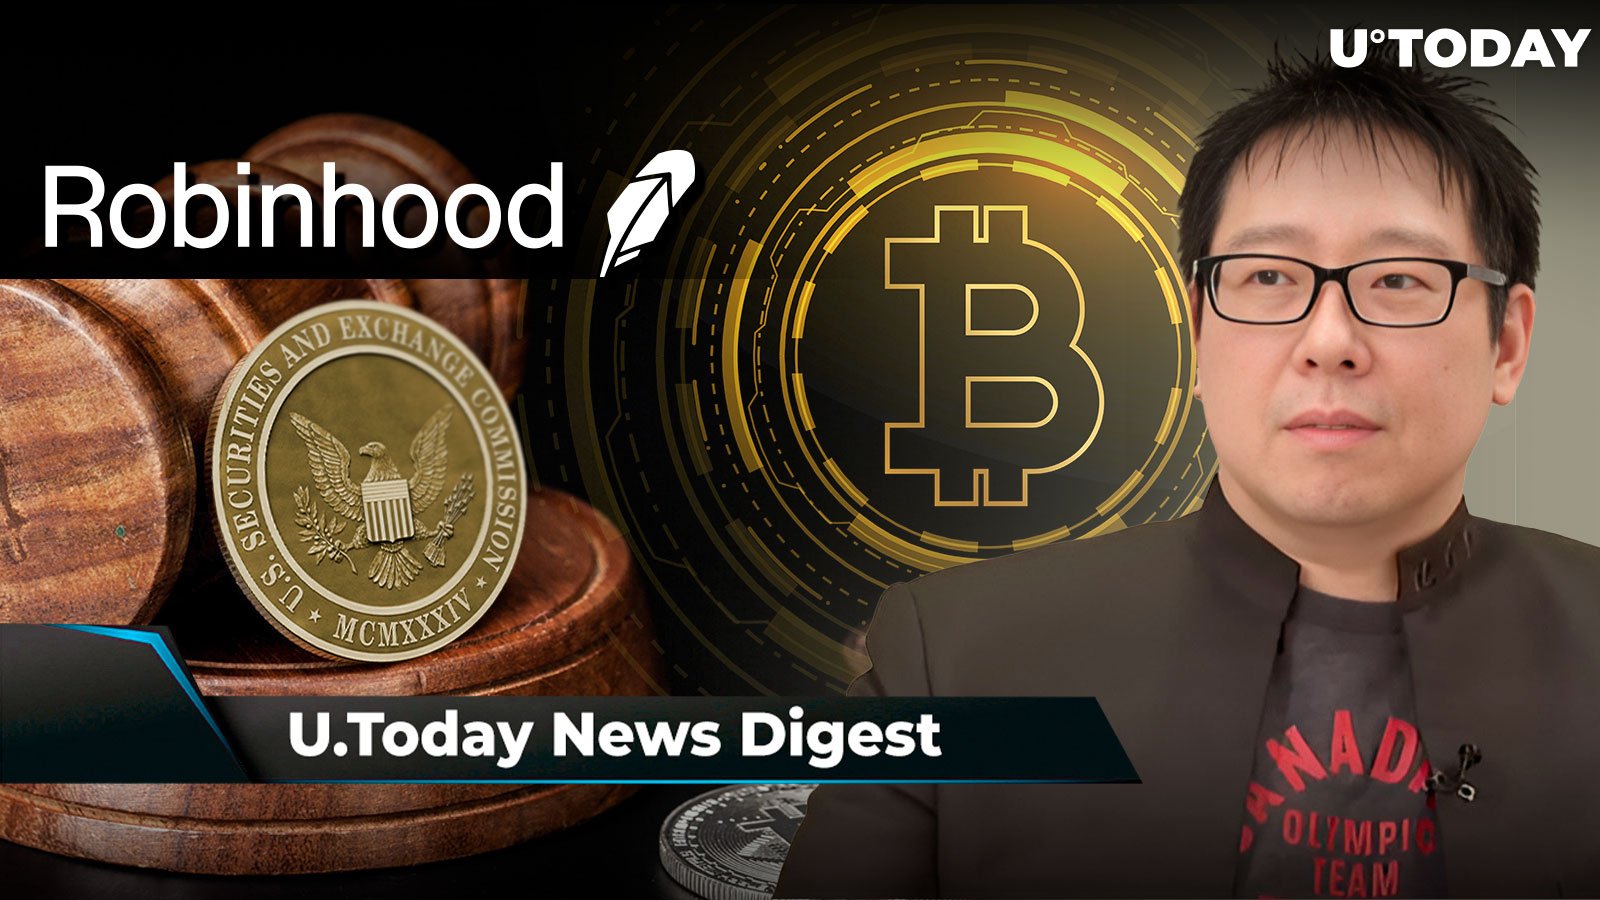 Robinhood CEO Issues Firm Response to SEC, Samson Mow Expects New BTC All-Time High Soon, SHIB Lead Shytoshi Kusama Shares Mysterious Teaser: Crypto News Digest by U.Today